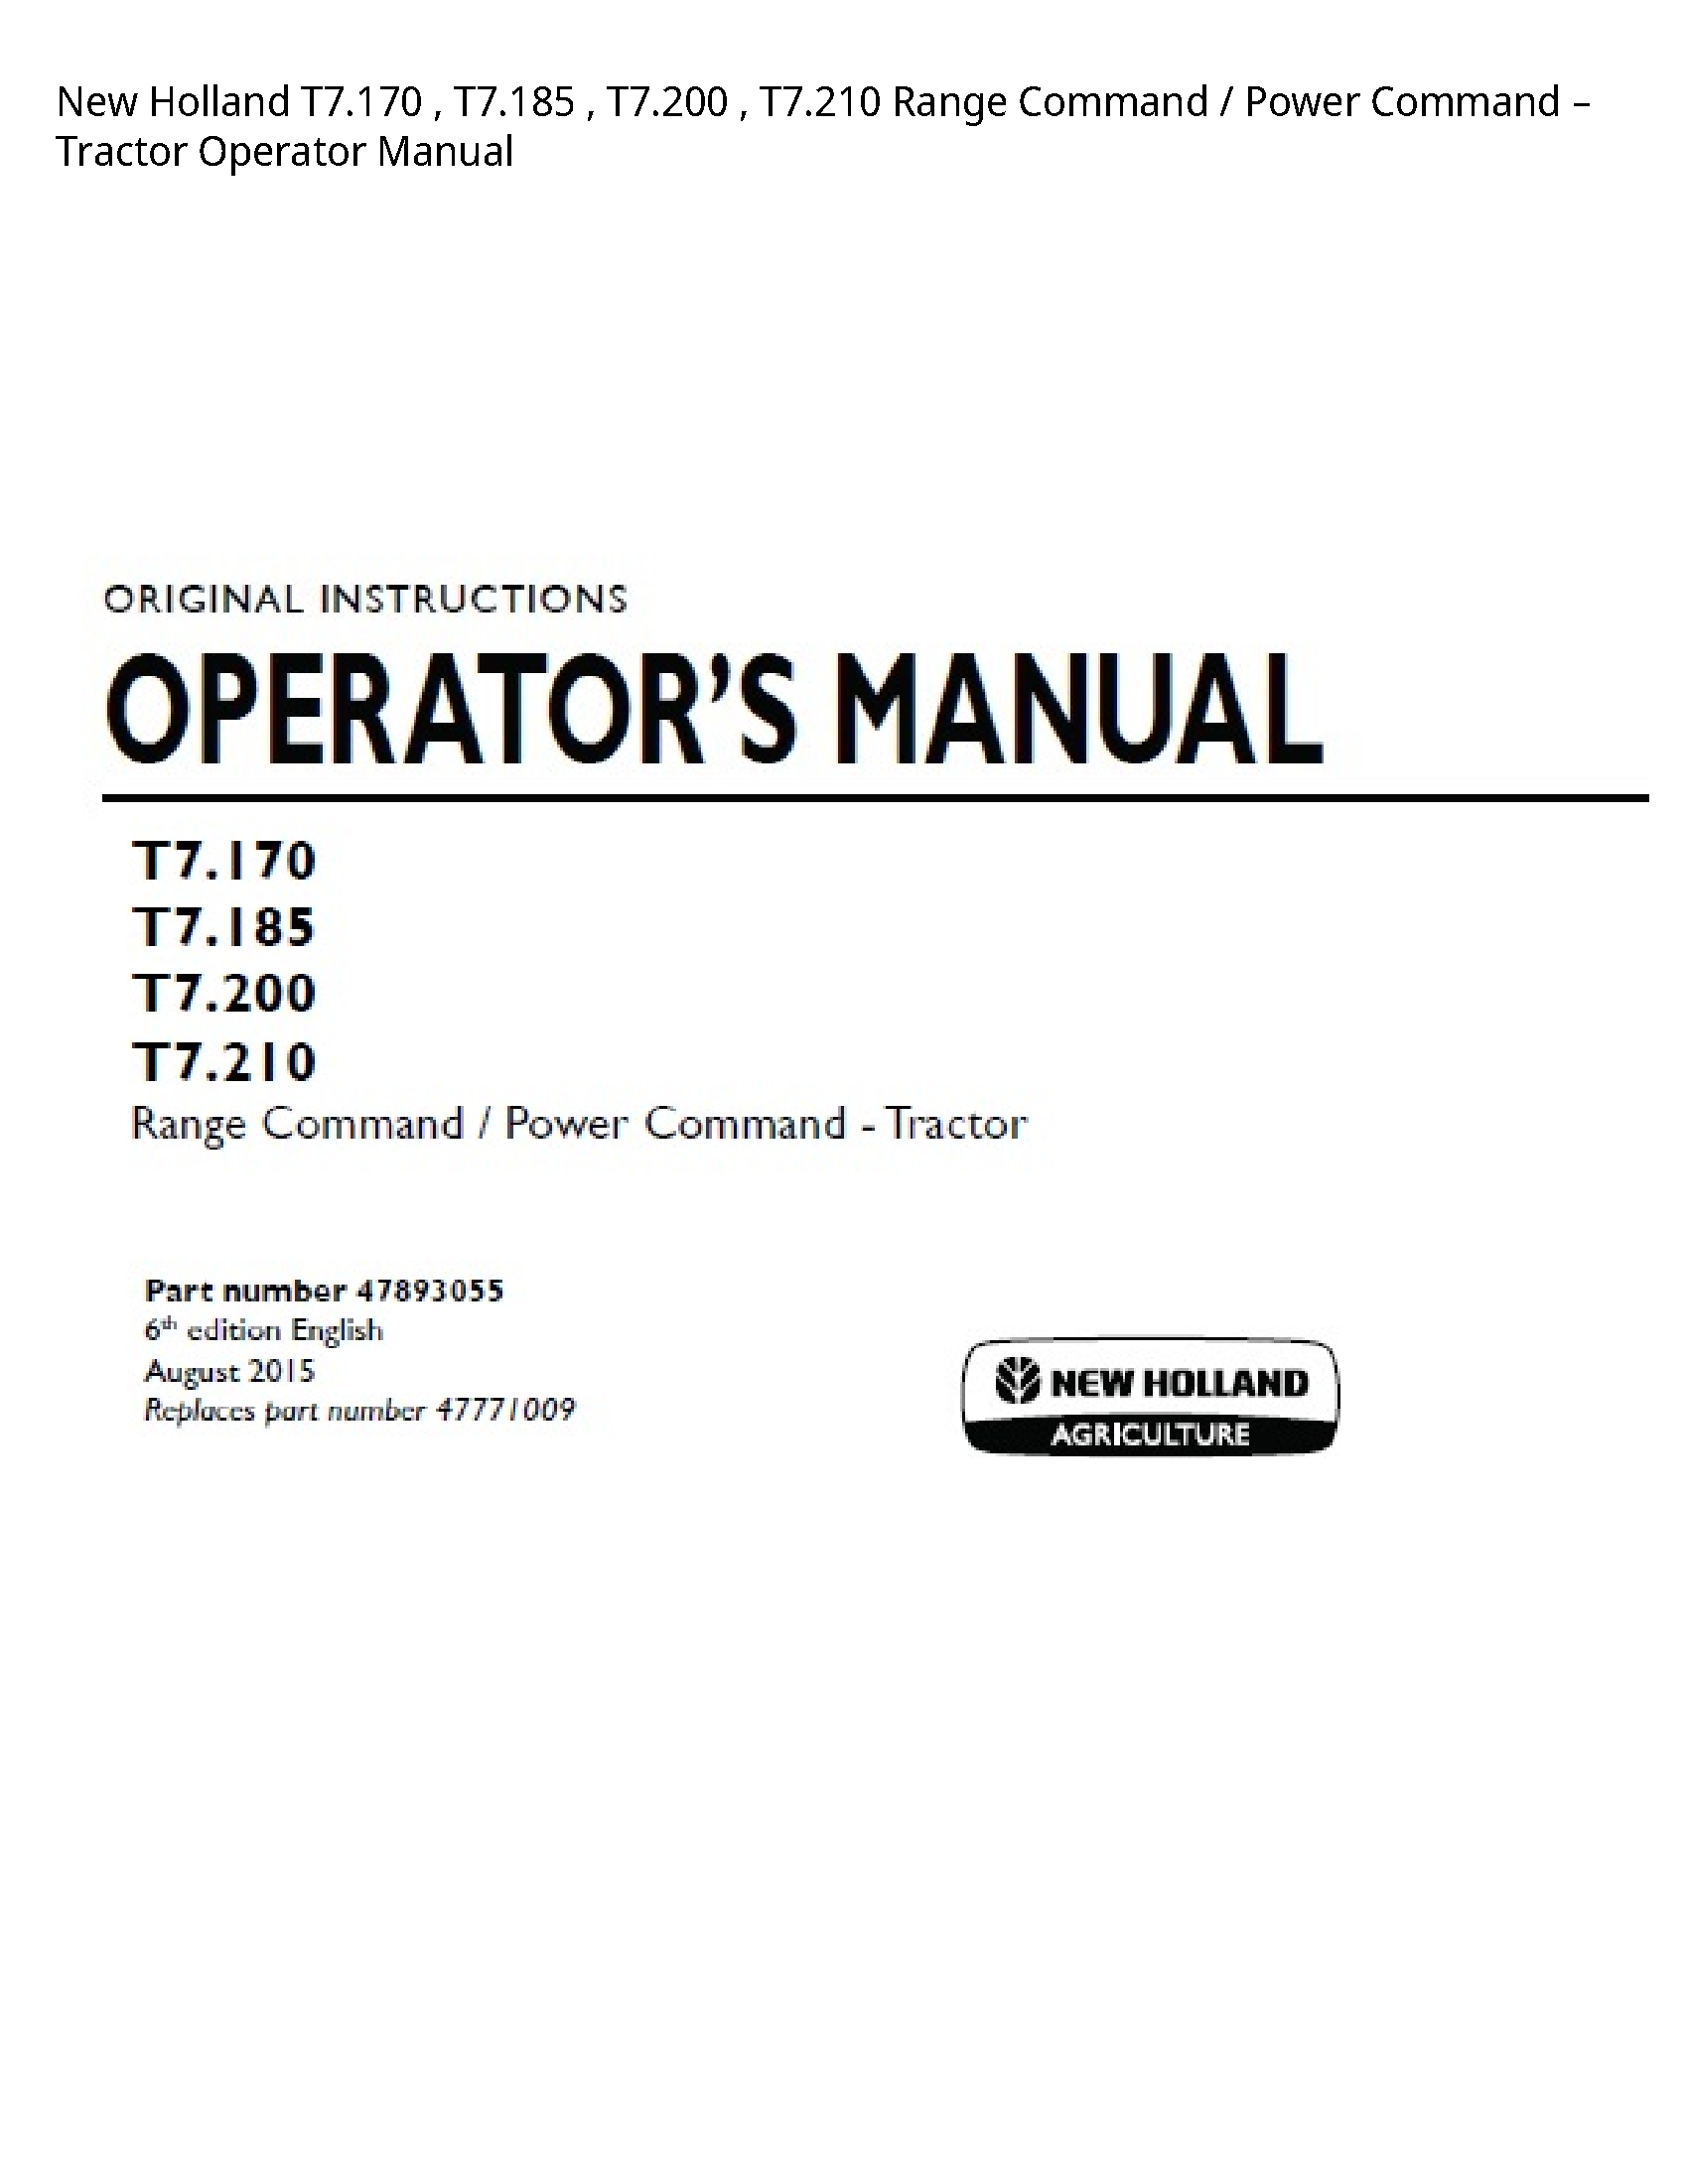 New Holland T7.170 Range Command Power Command Tractor Operator manual